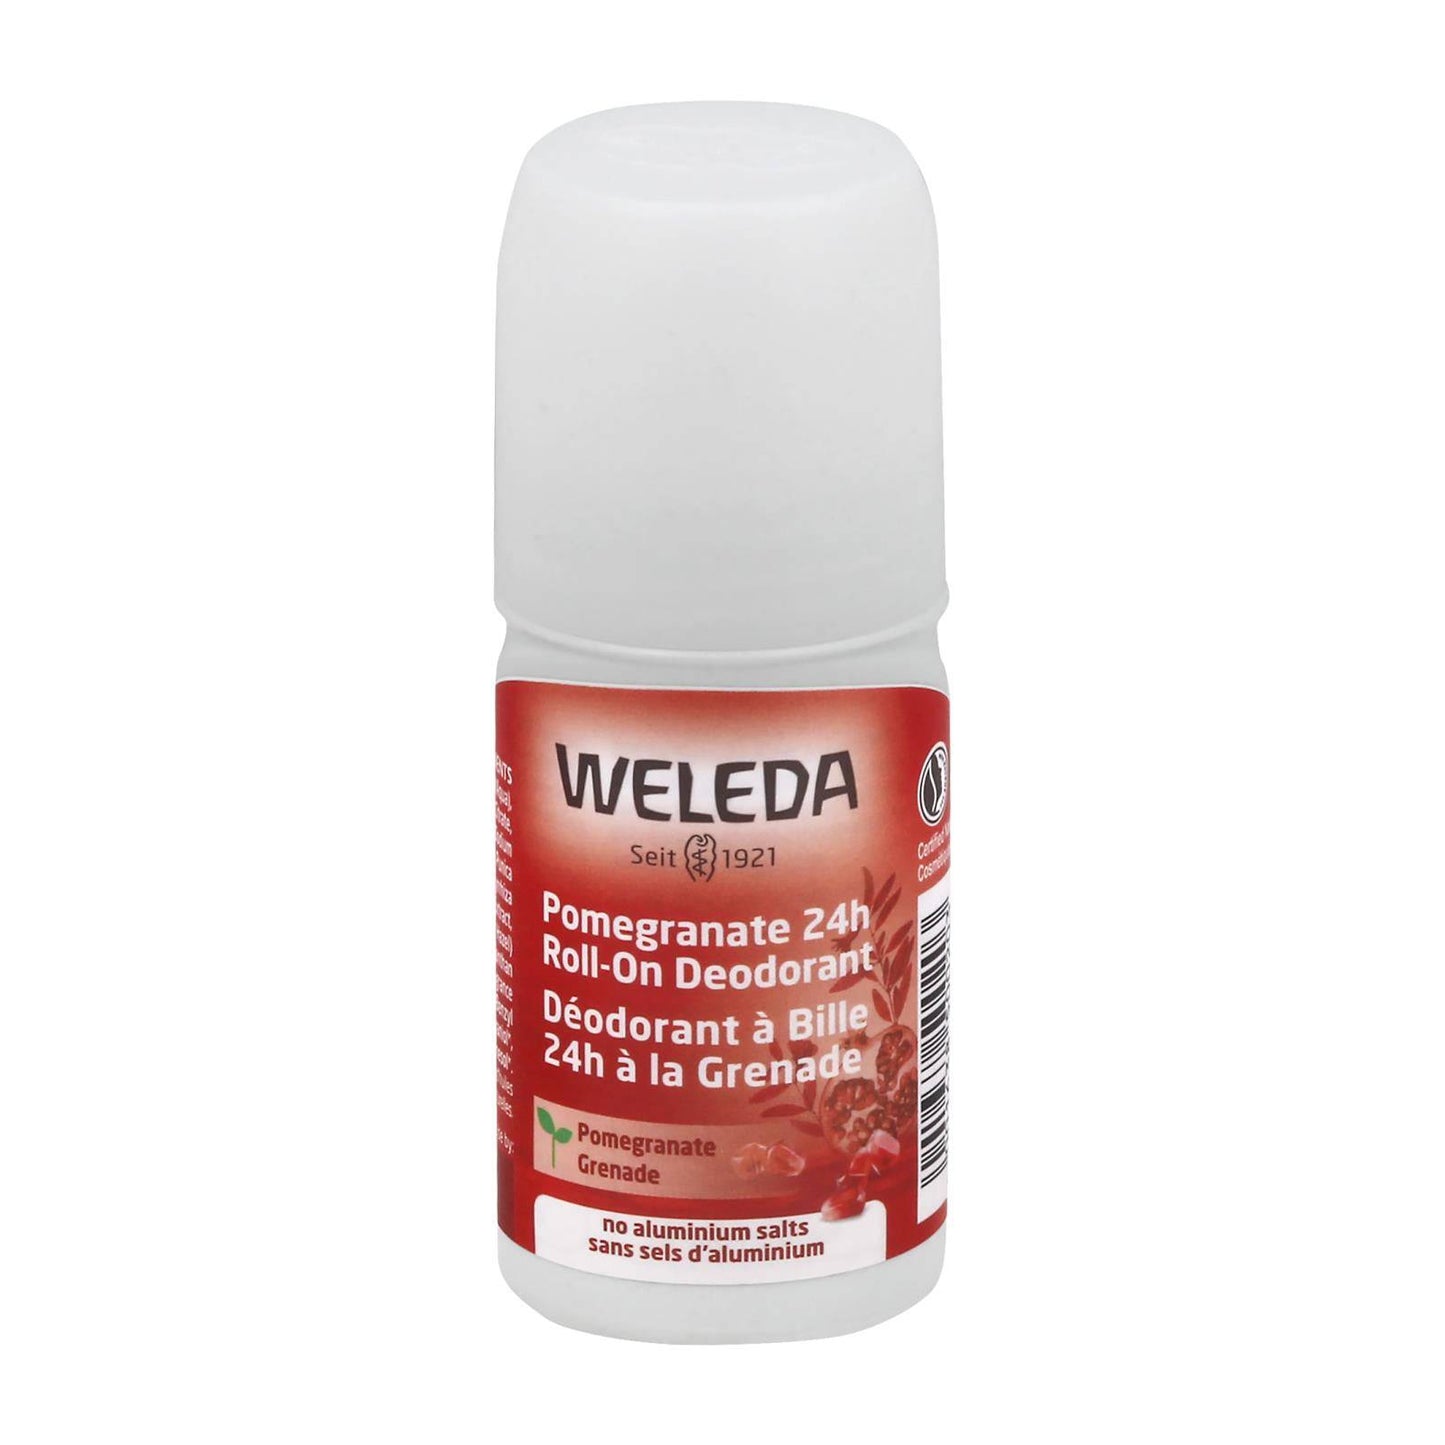 Weleda - Deodorant Roll On Pomegranate - 1 Each - 1.7 Fz | OnlyNaturals.us